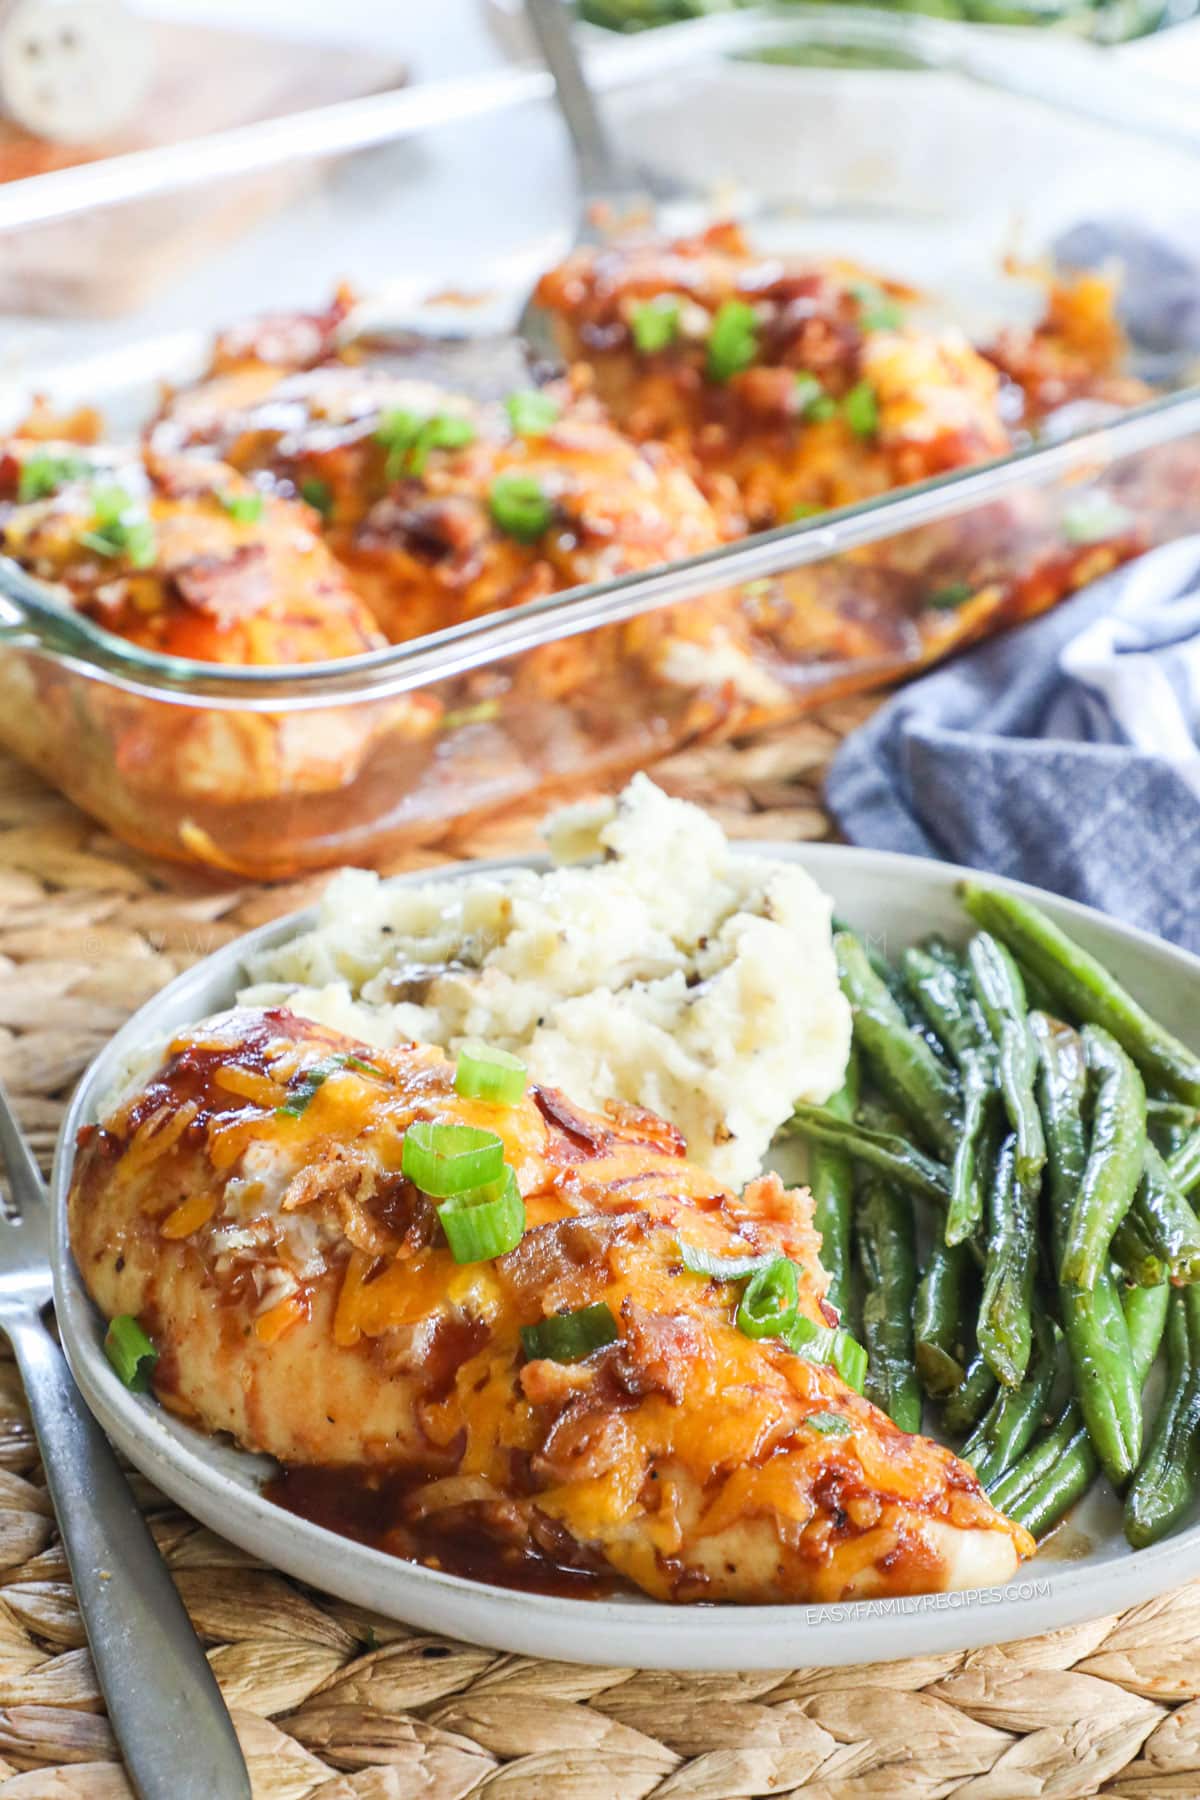 Mesquite Chicken served with green beans and mashed potatoes